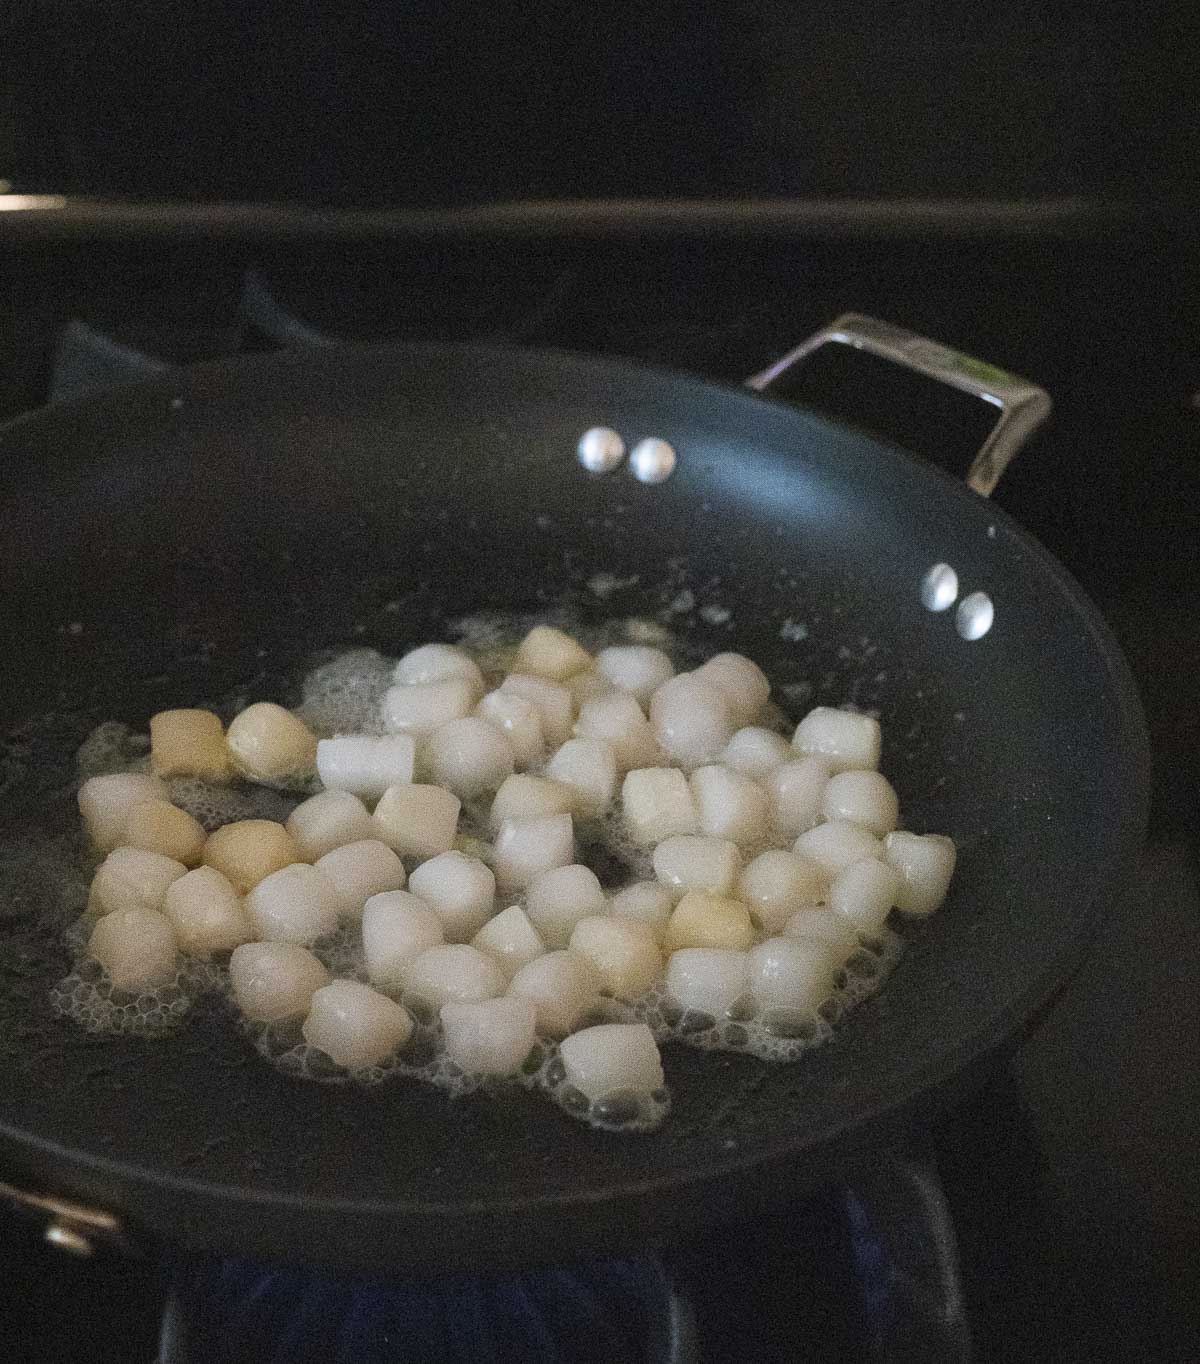 Bay scallops being seared with oil in a skillet.